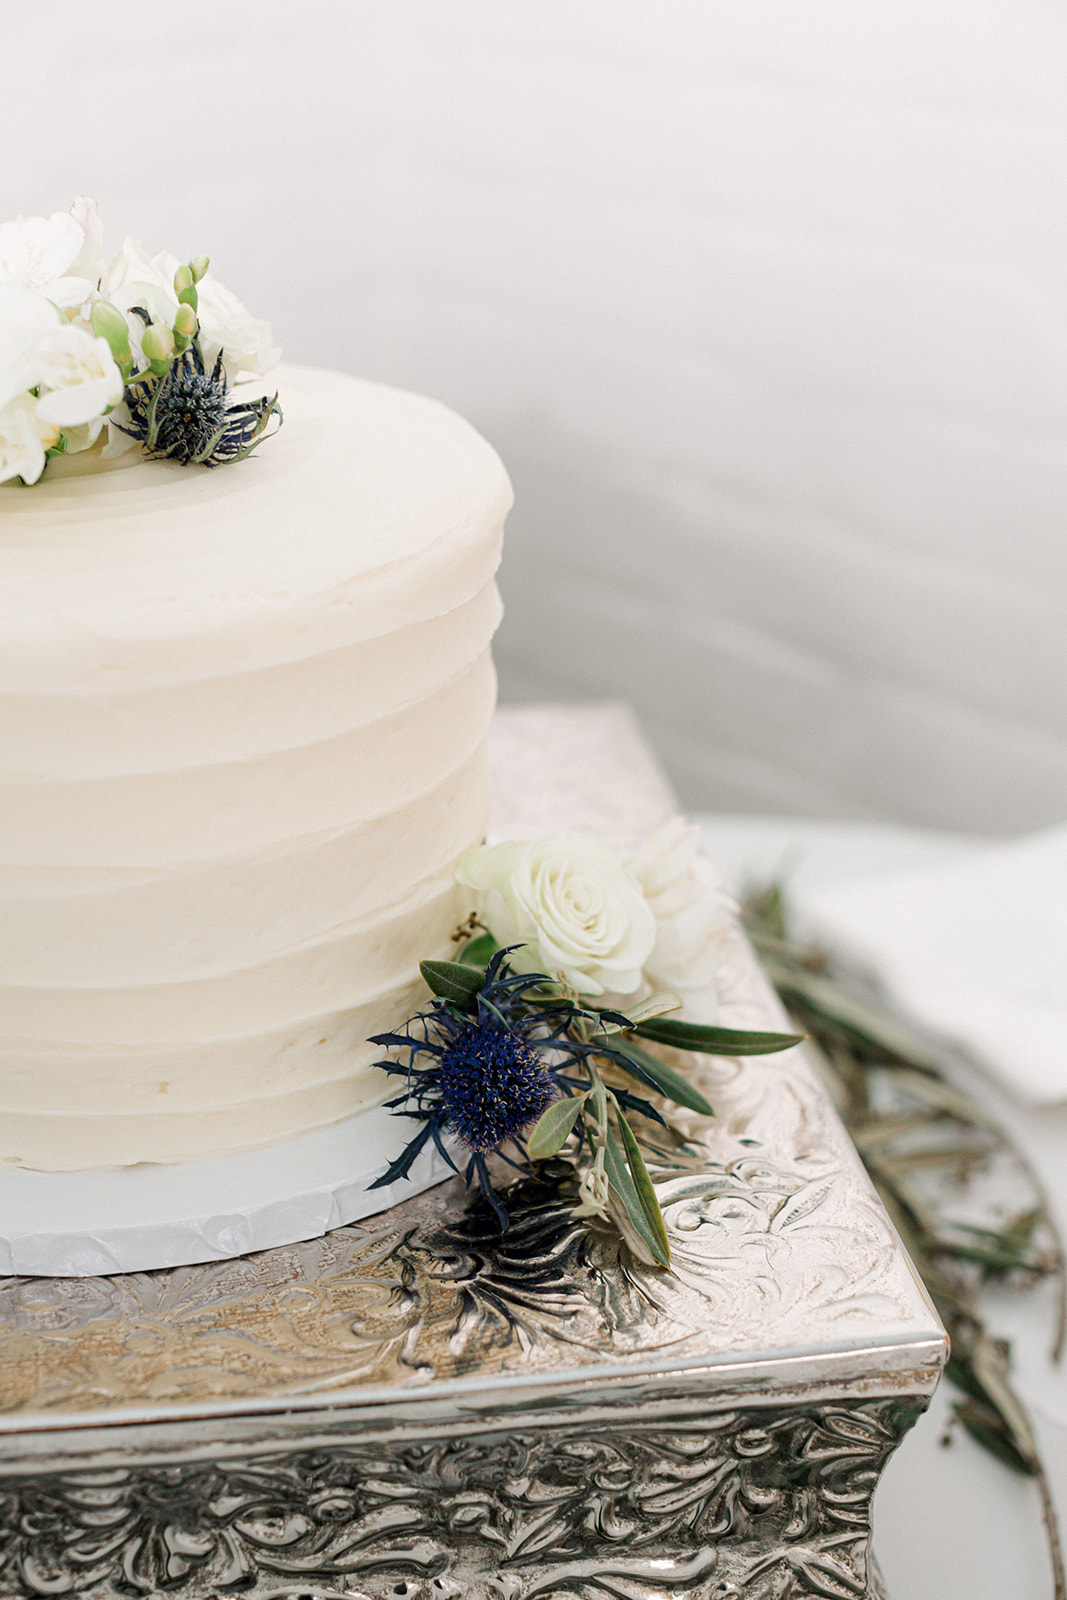 Simple white wedding cake with blue thistle flowers